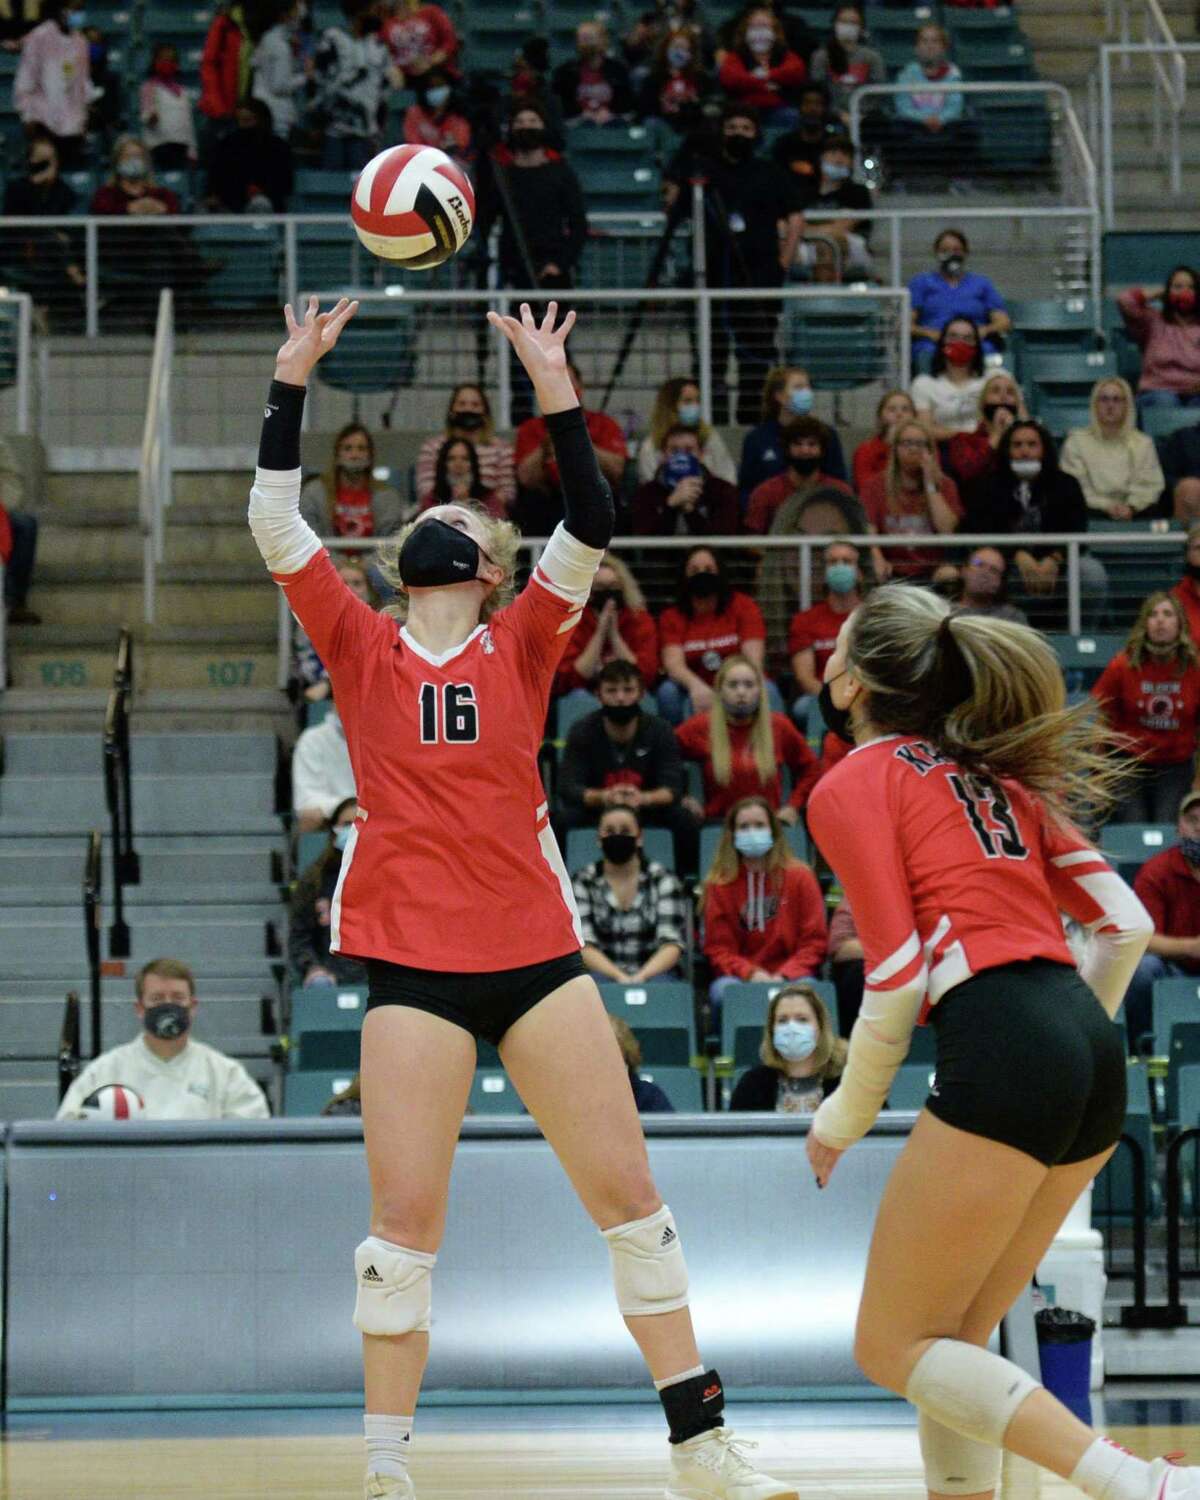 Maddie Waak (16) of Katy sets a ball for Reghan Jones (13) during the first set of the 6A Region 3 Championship game between the Katy Tigers and the Seven Lakes Spartans on Friday, December 4, 2020 at Leonard Merrell Center, Katy, TX.